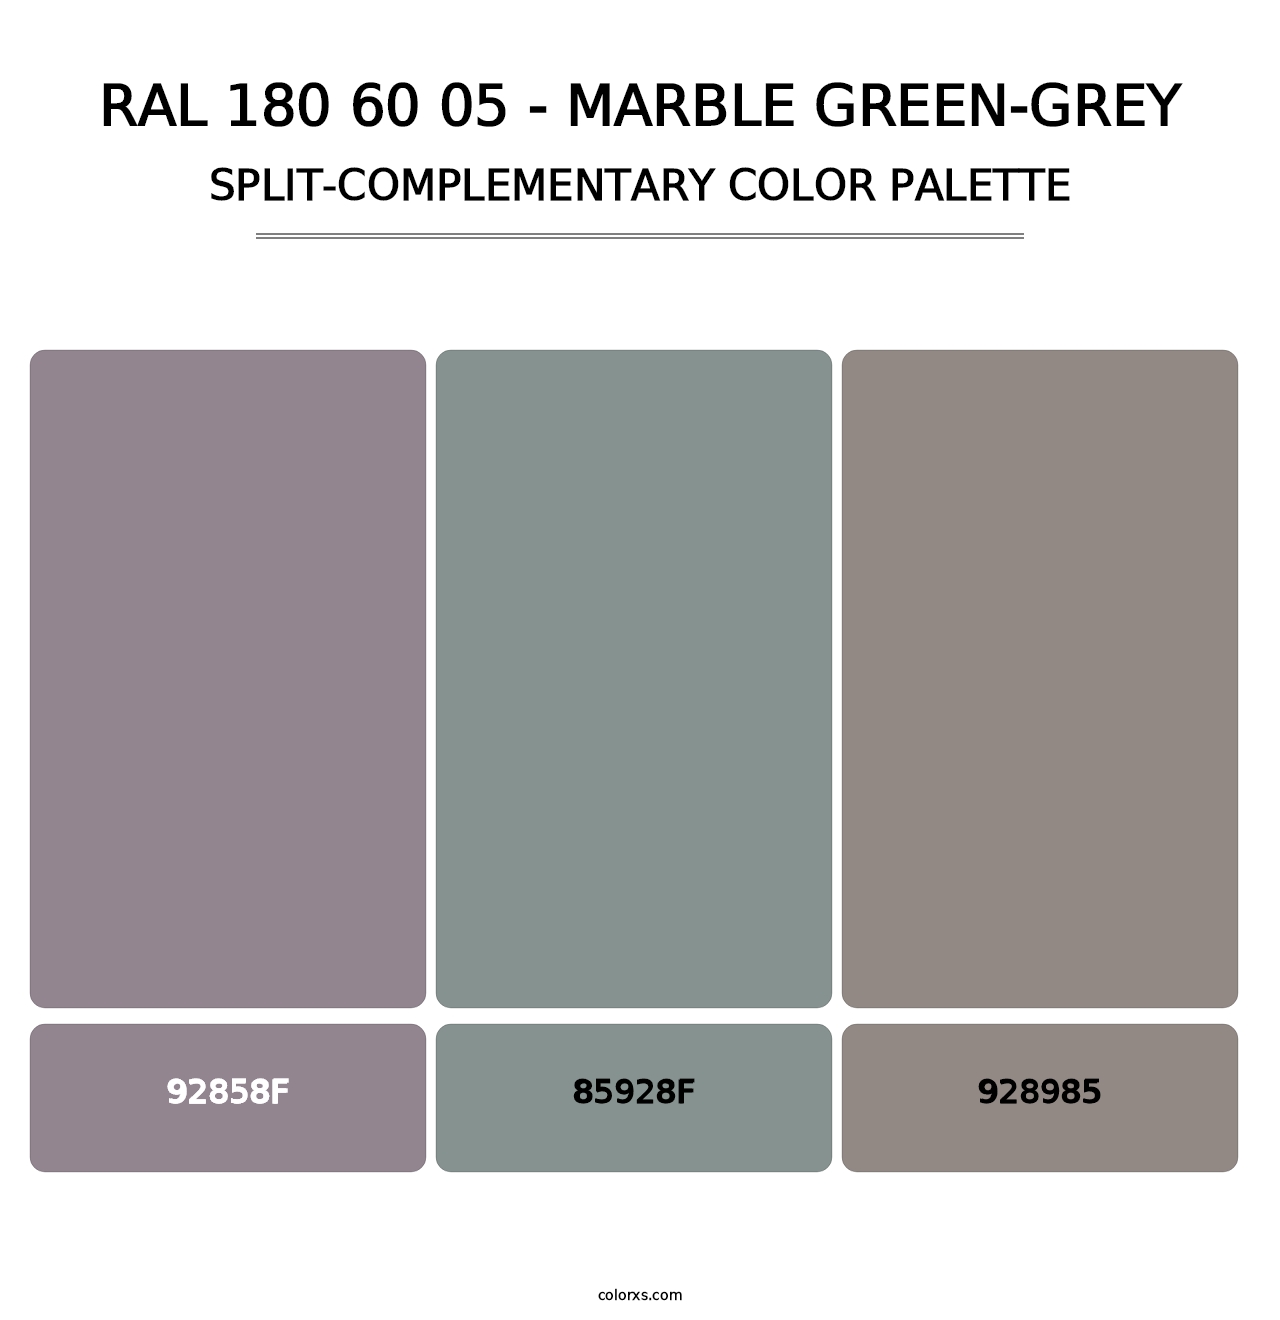 RAL 180 60 05 - Marble Green-Grey - Split-Complementary Color Palette